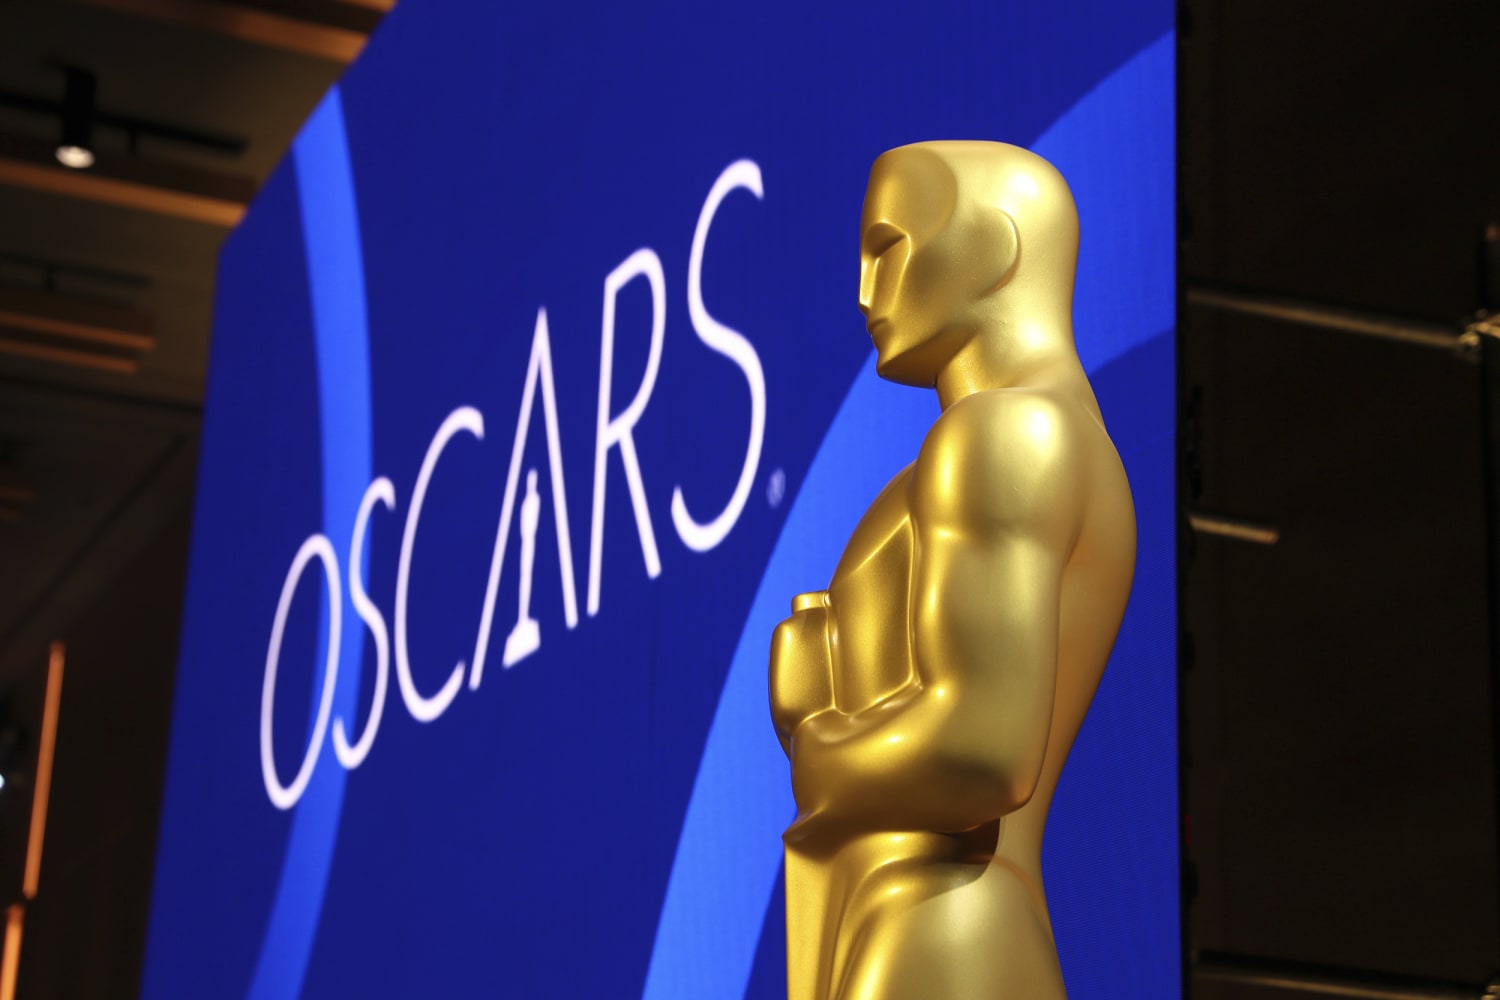 Oscars 2021: How to stream the awards show without cable